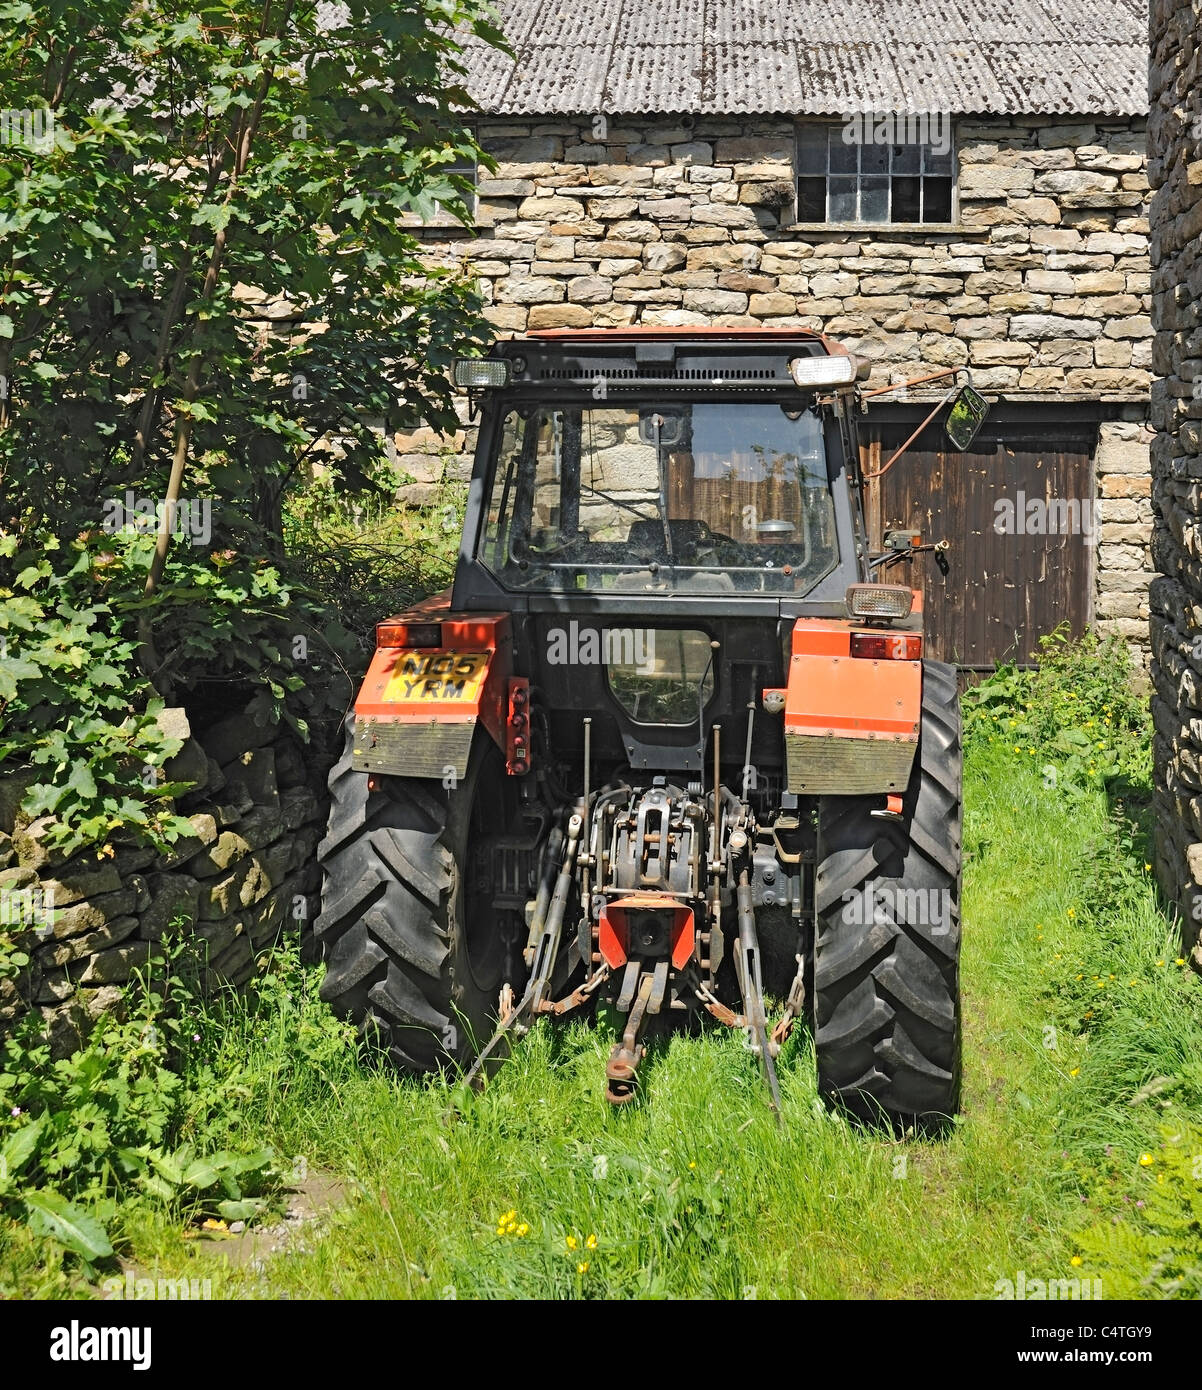 An old Ursus tractor standing on a farm in Muker, Swaledale, Yorkshire, England Stock Photo